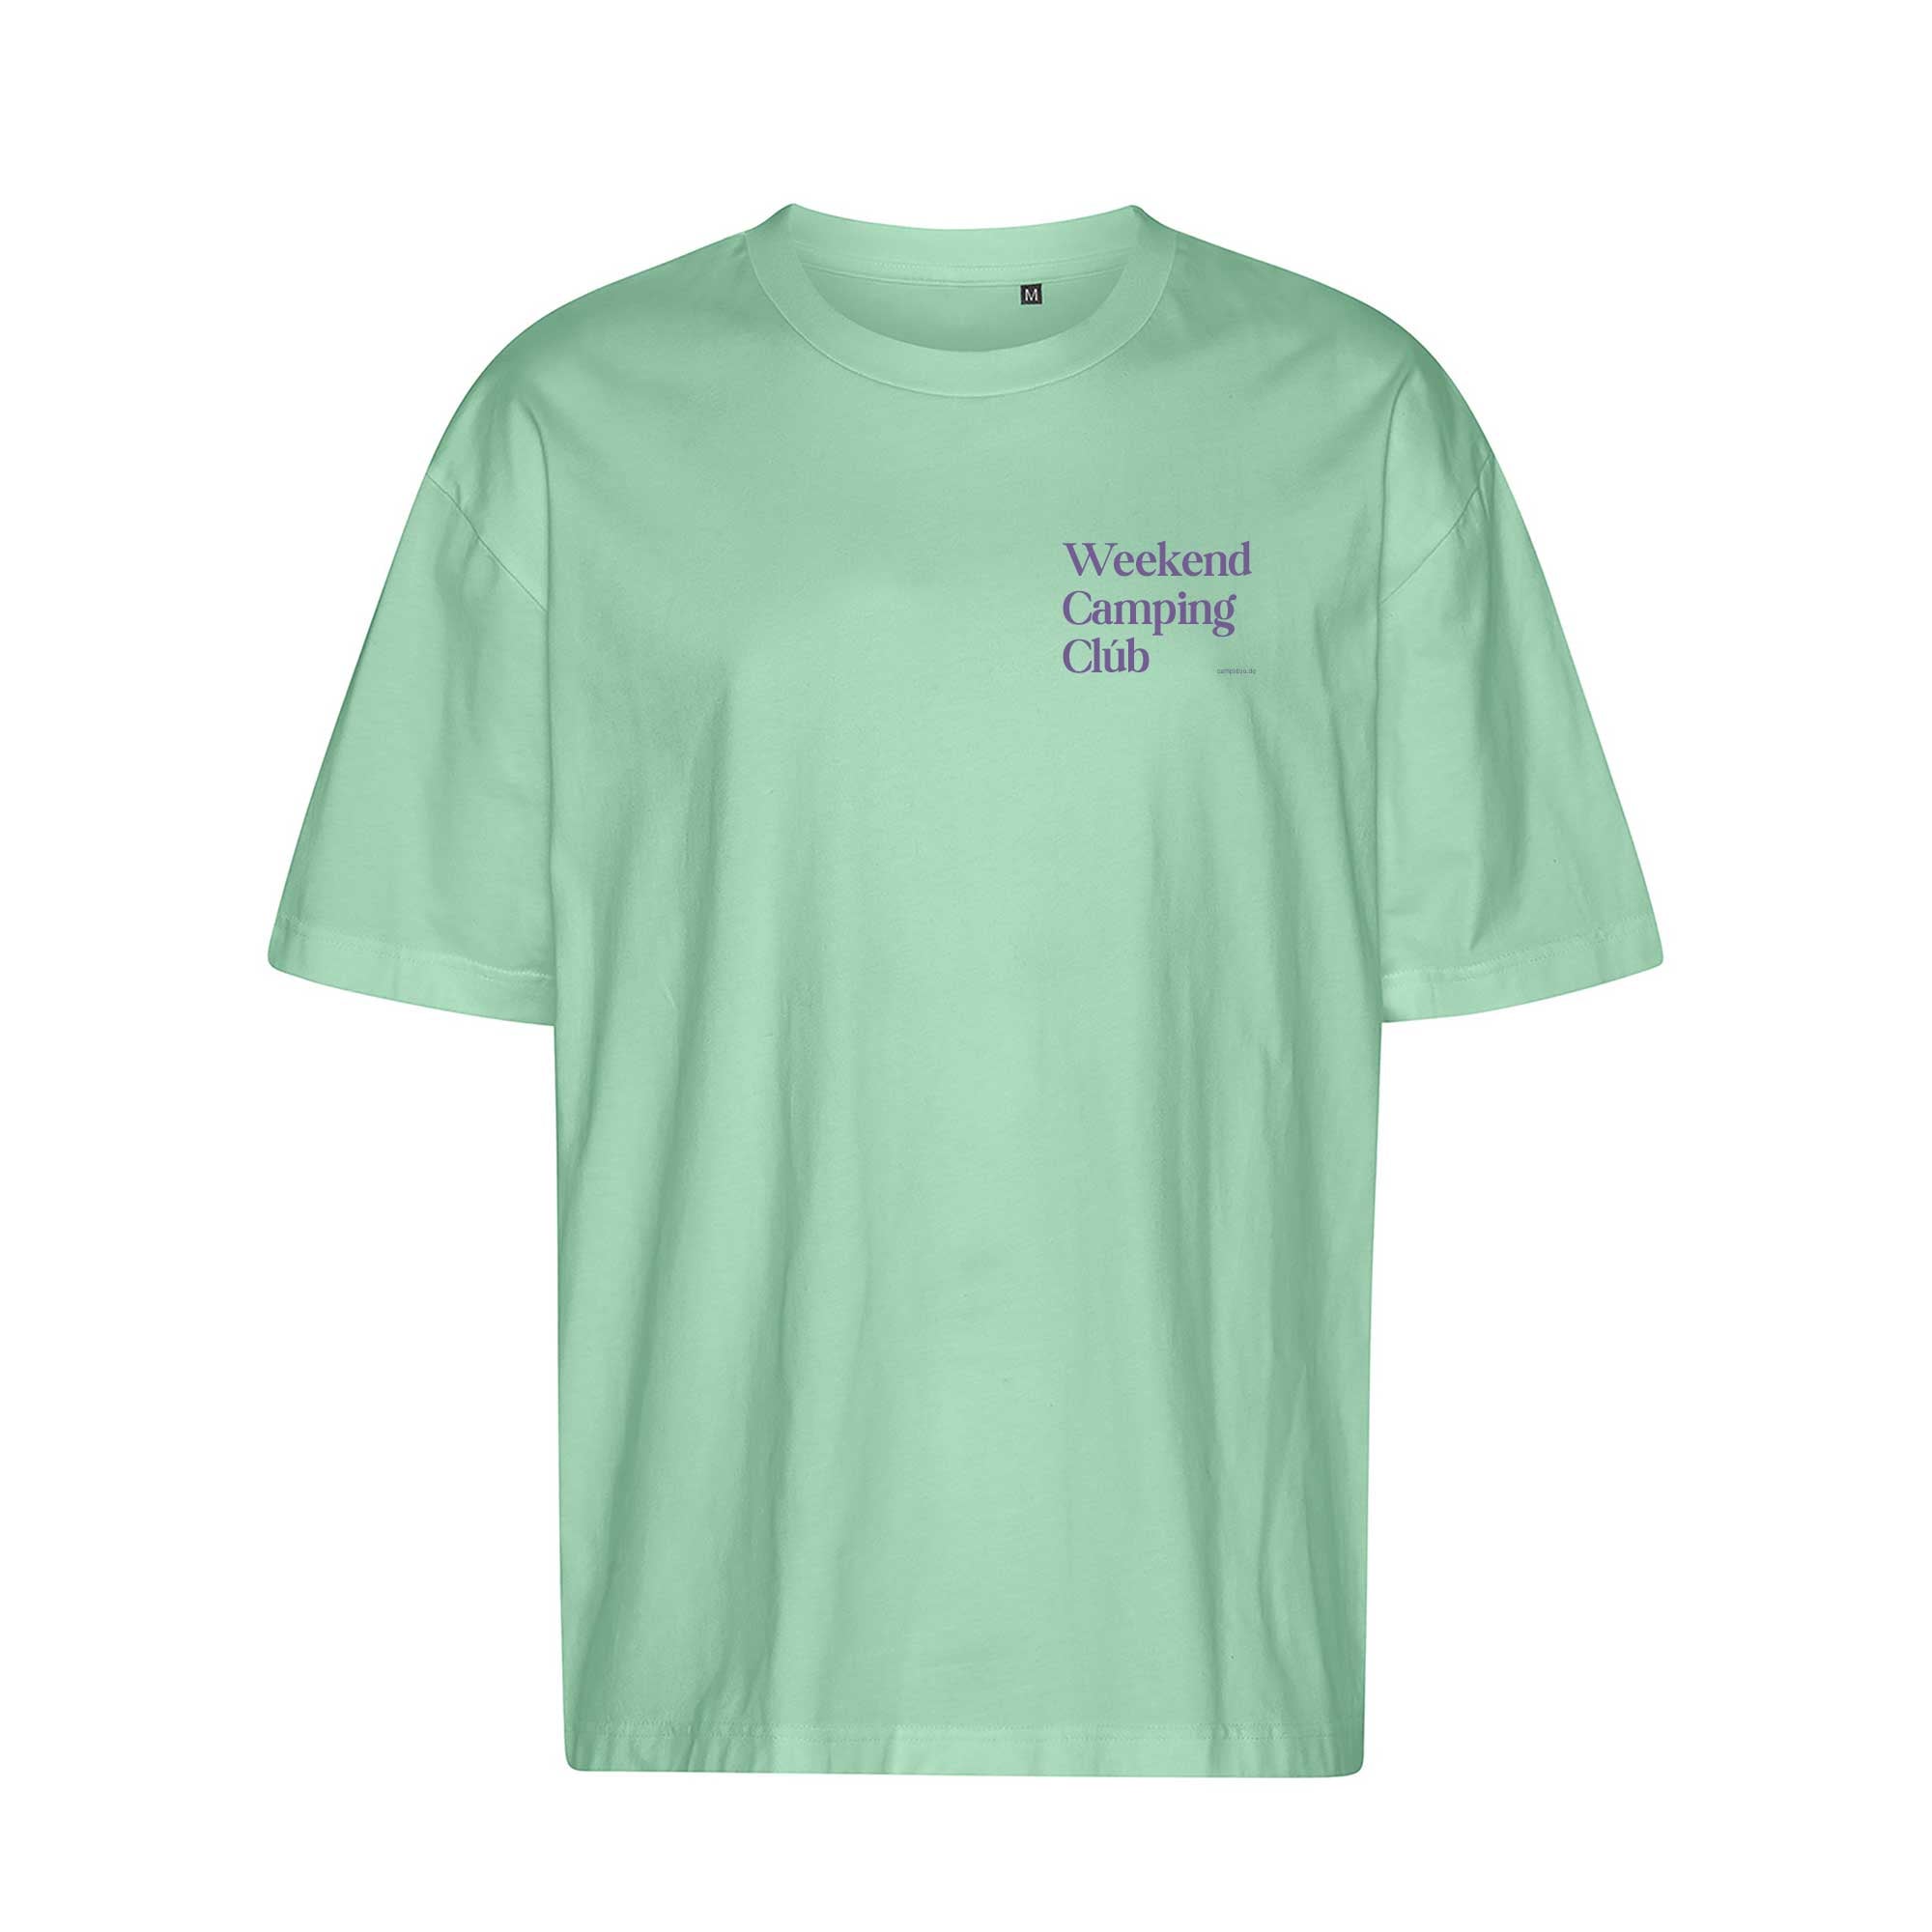 Oversized T-Shirt MINT "Weekend Camping Club"